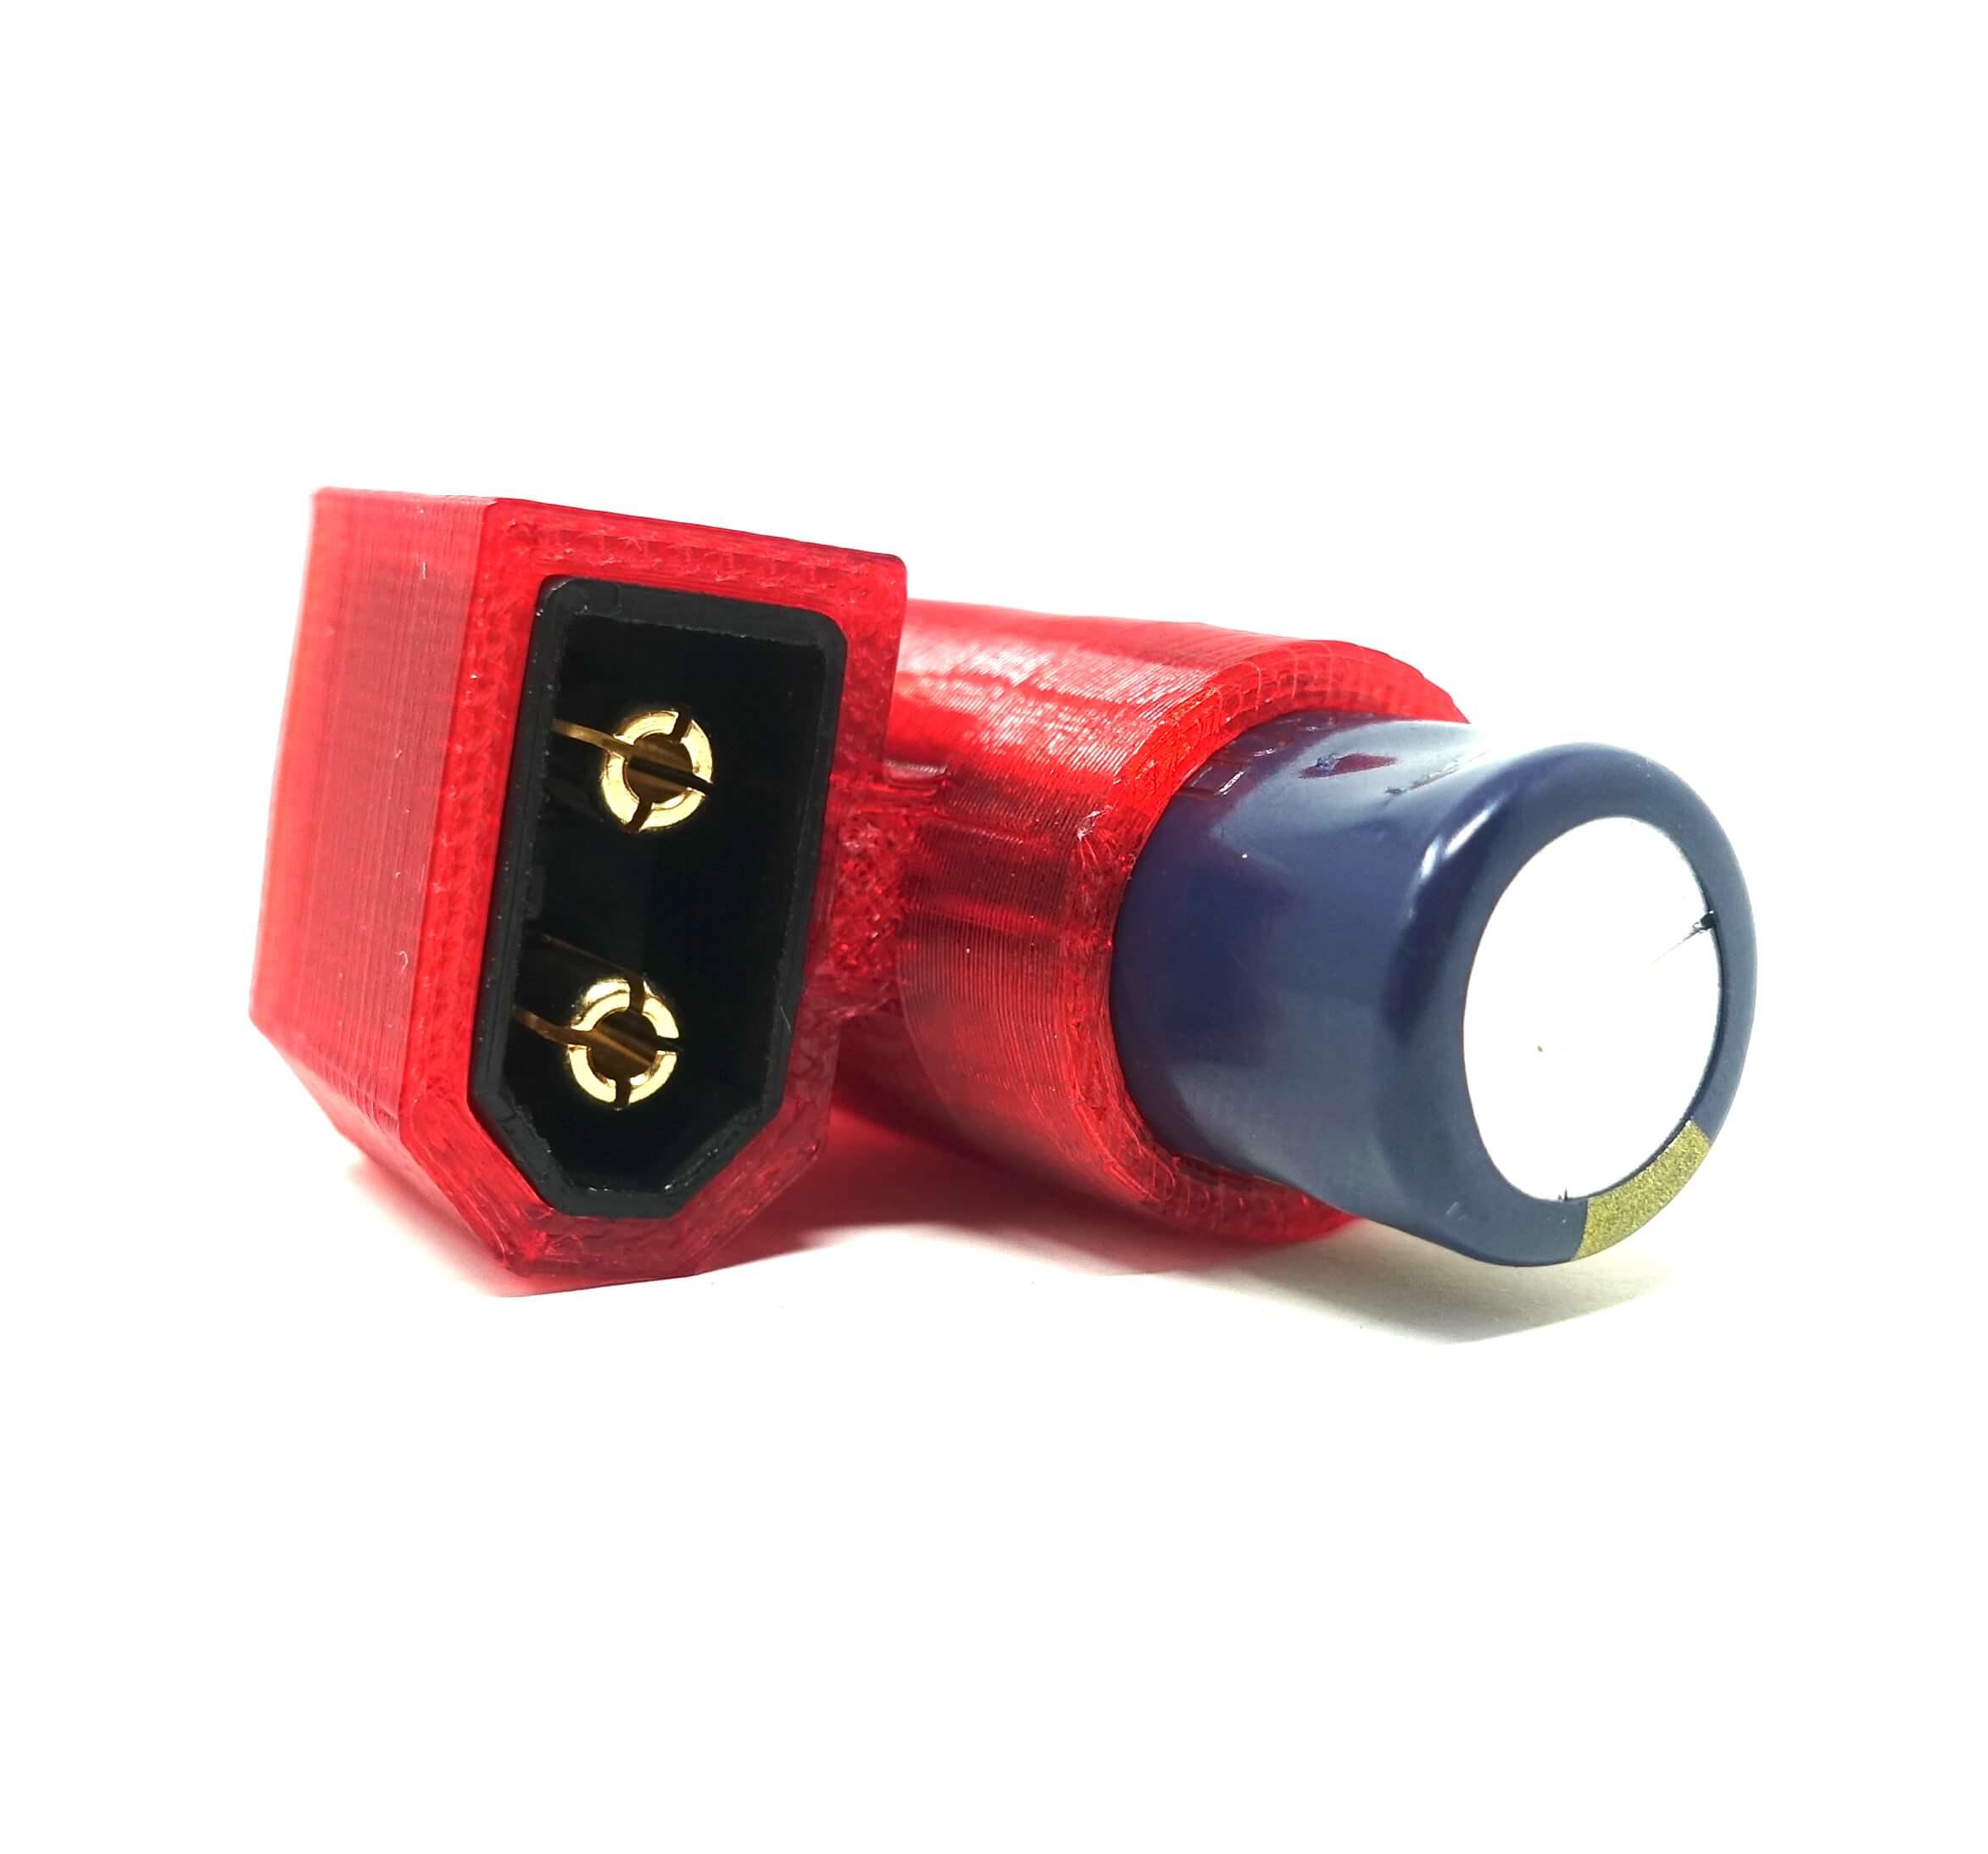 TPU RACING/FREESTYLE DRONE XT60 CAPACITOR HOLDER